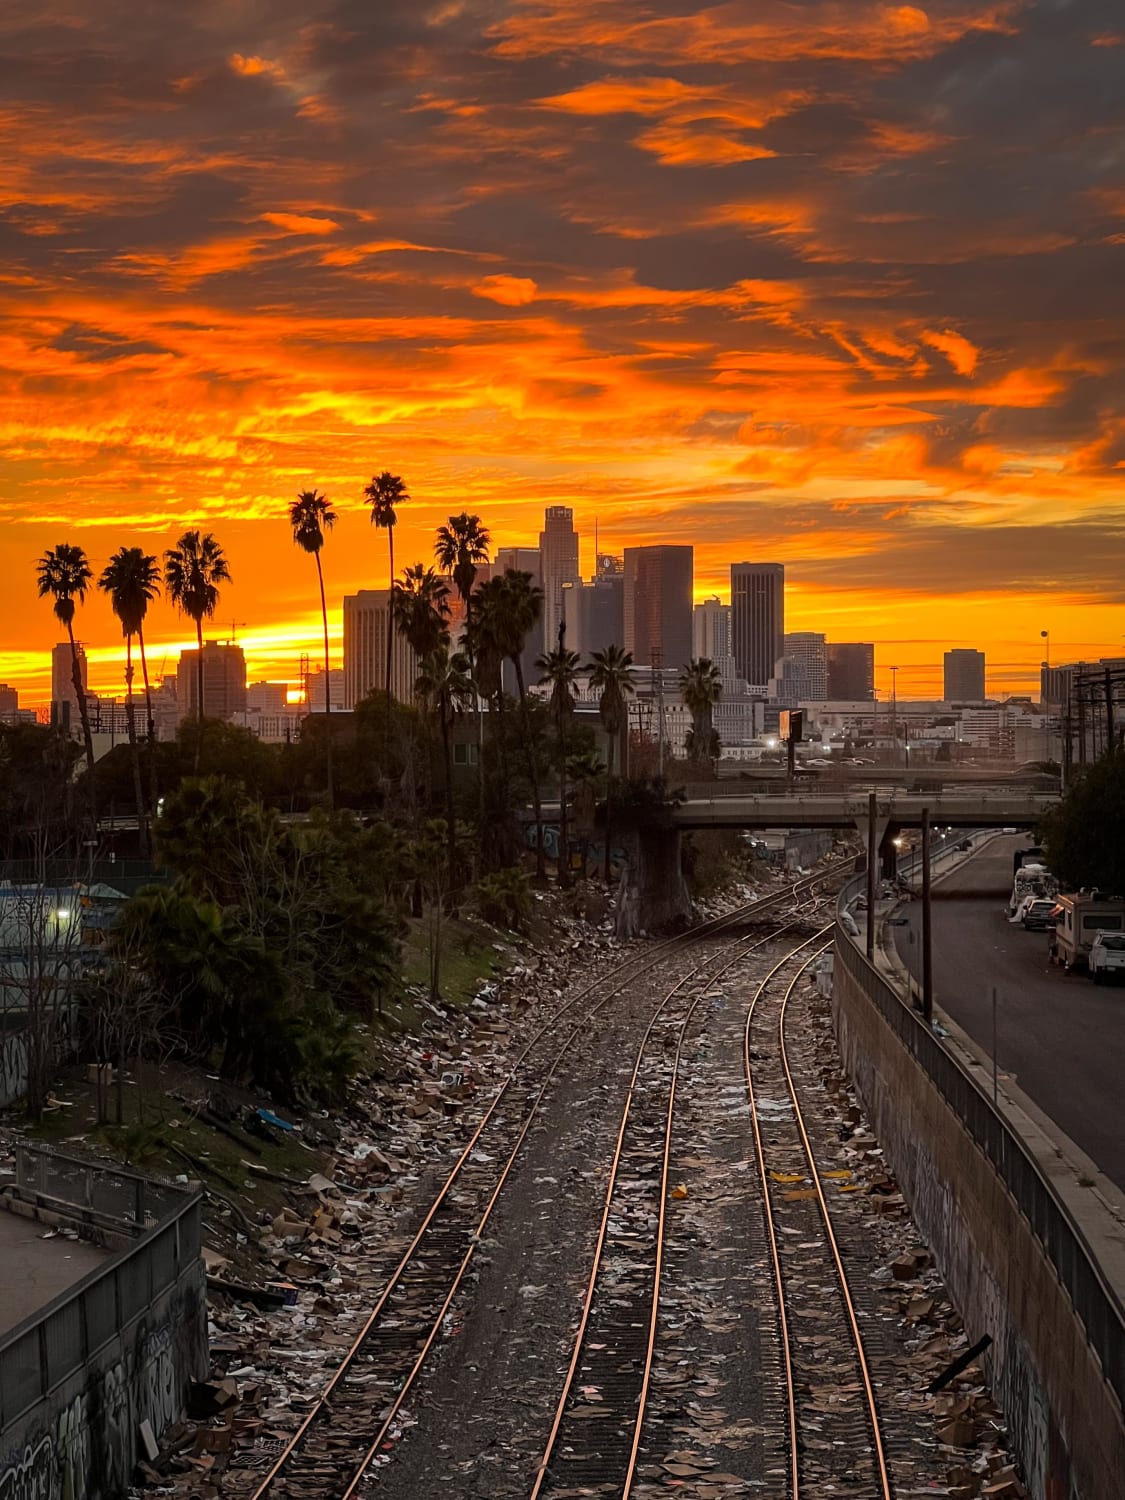 ITAP of Sunset Over Stolen Package Wasteland - Los Angeles